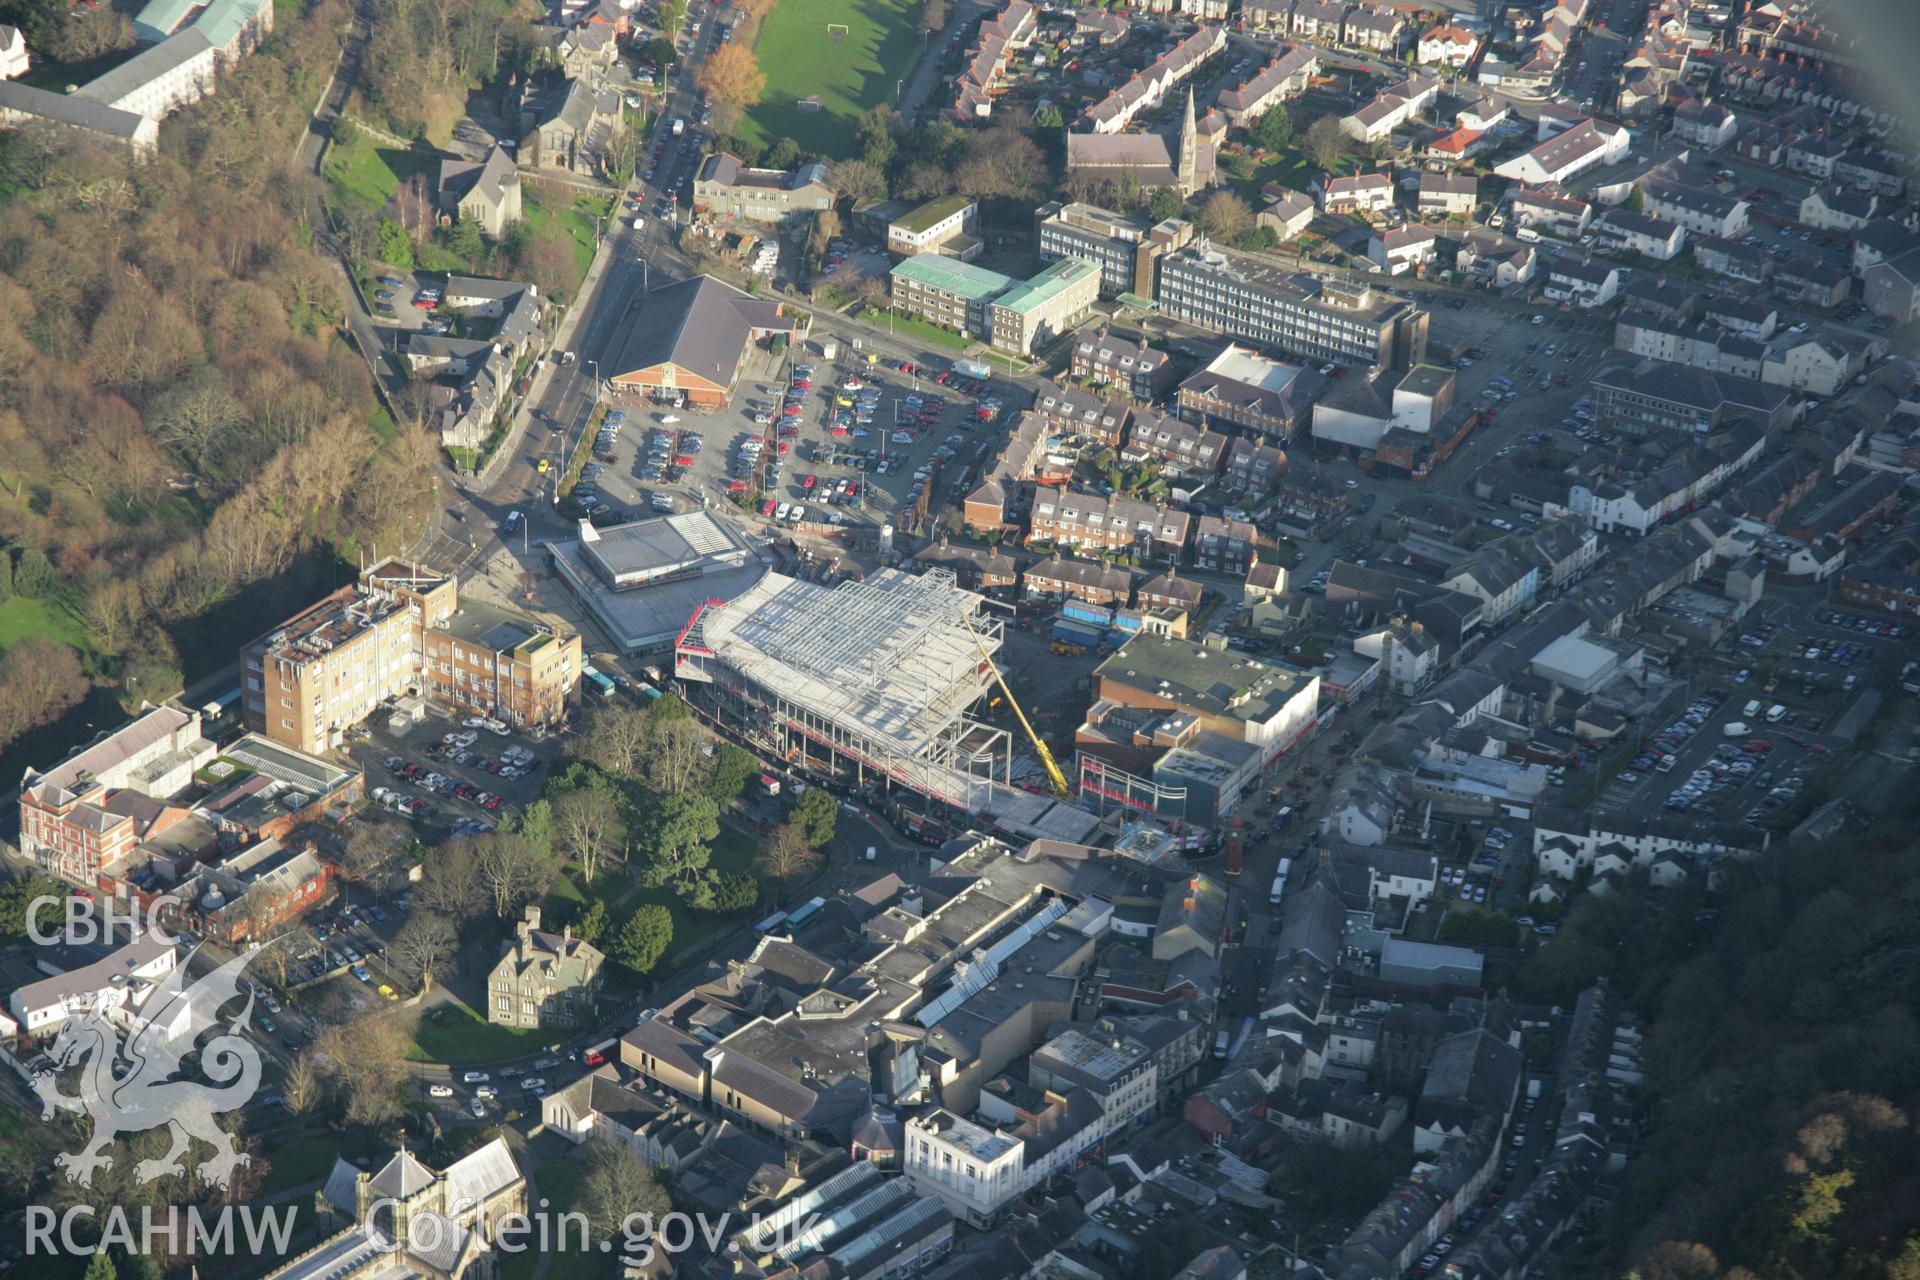 RCAHMW colour oblique aerial photograph of Bangor. Taken on 25 January 2007 by Toby Driver